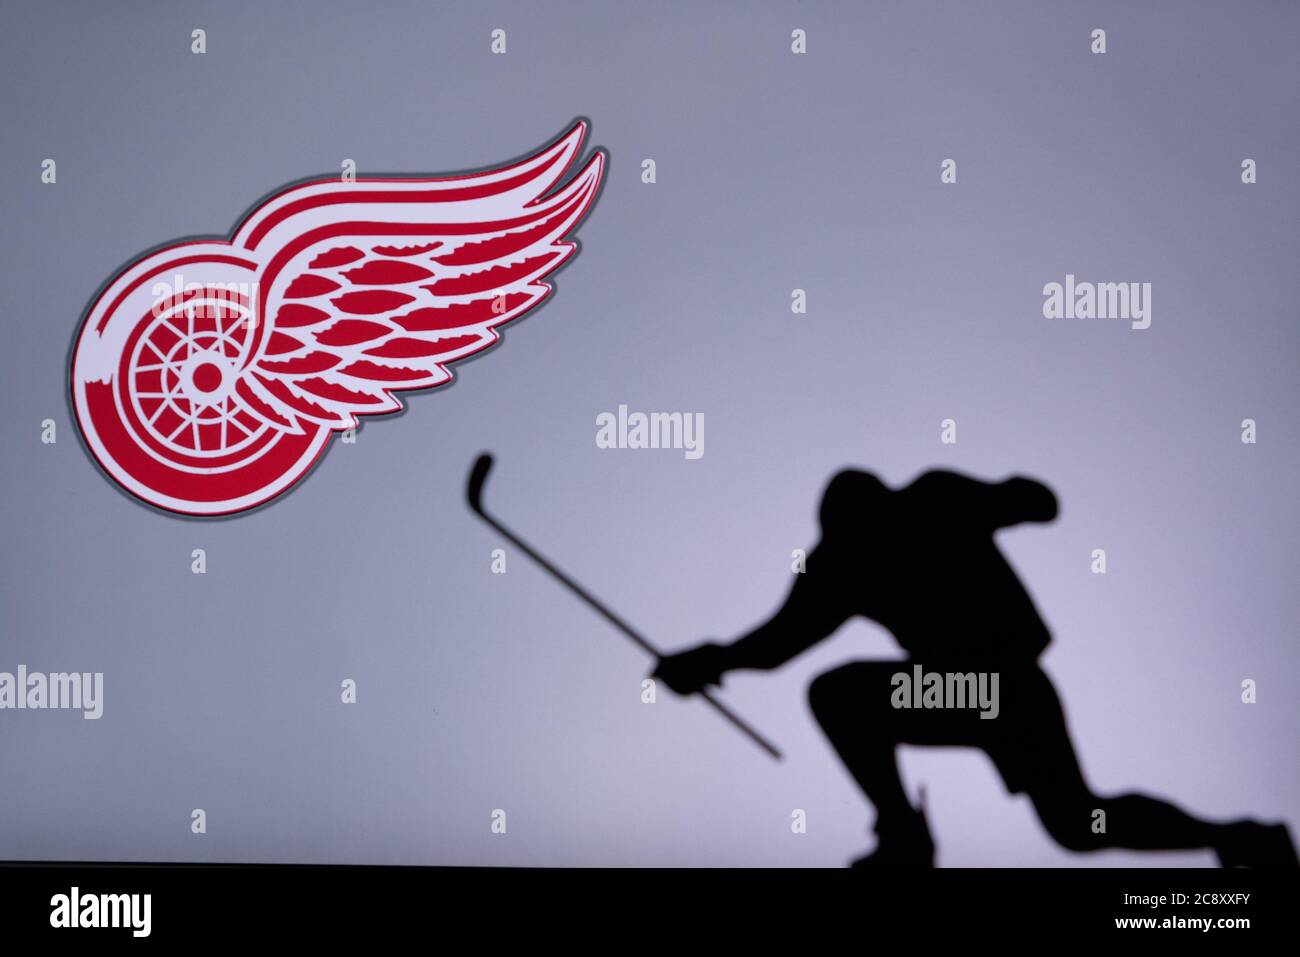 HD detroit red wings wallpapers